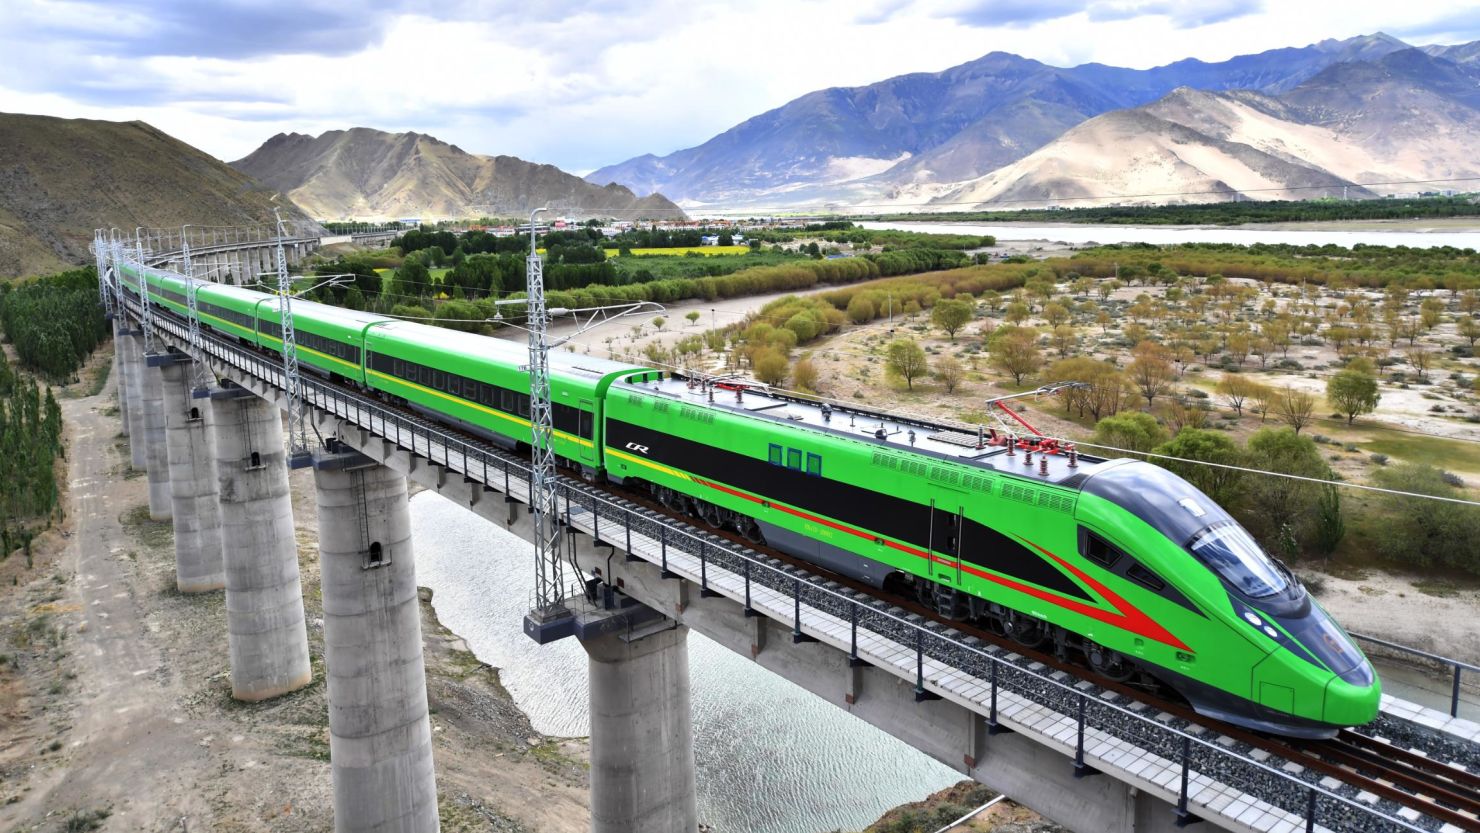 A Fuxing bullet train drives on the Lhasa-Nyingchi railway in Nyingchi, southwest China's Tibet Autonomous Region on June 16, 2021.   